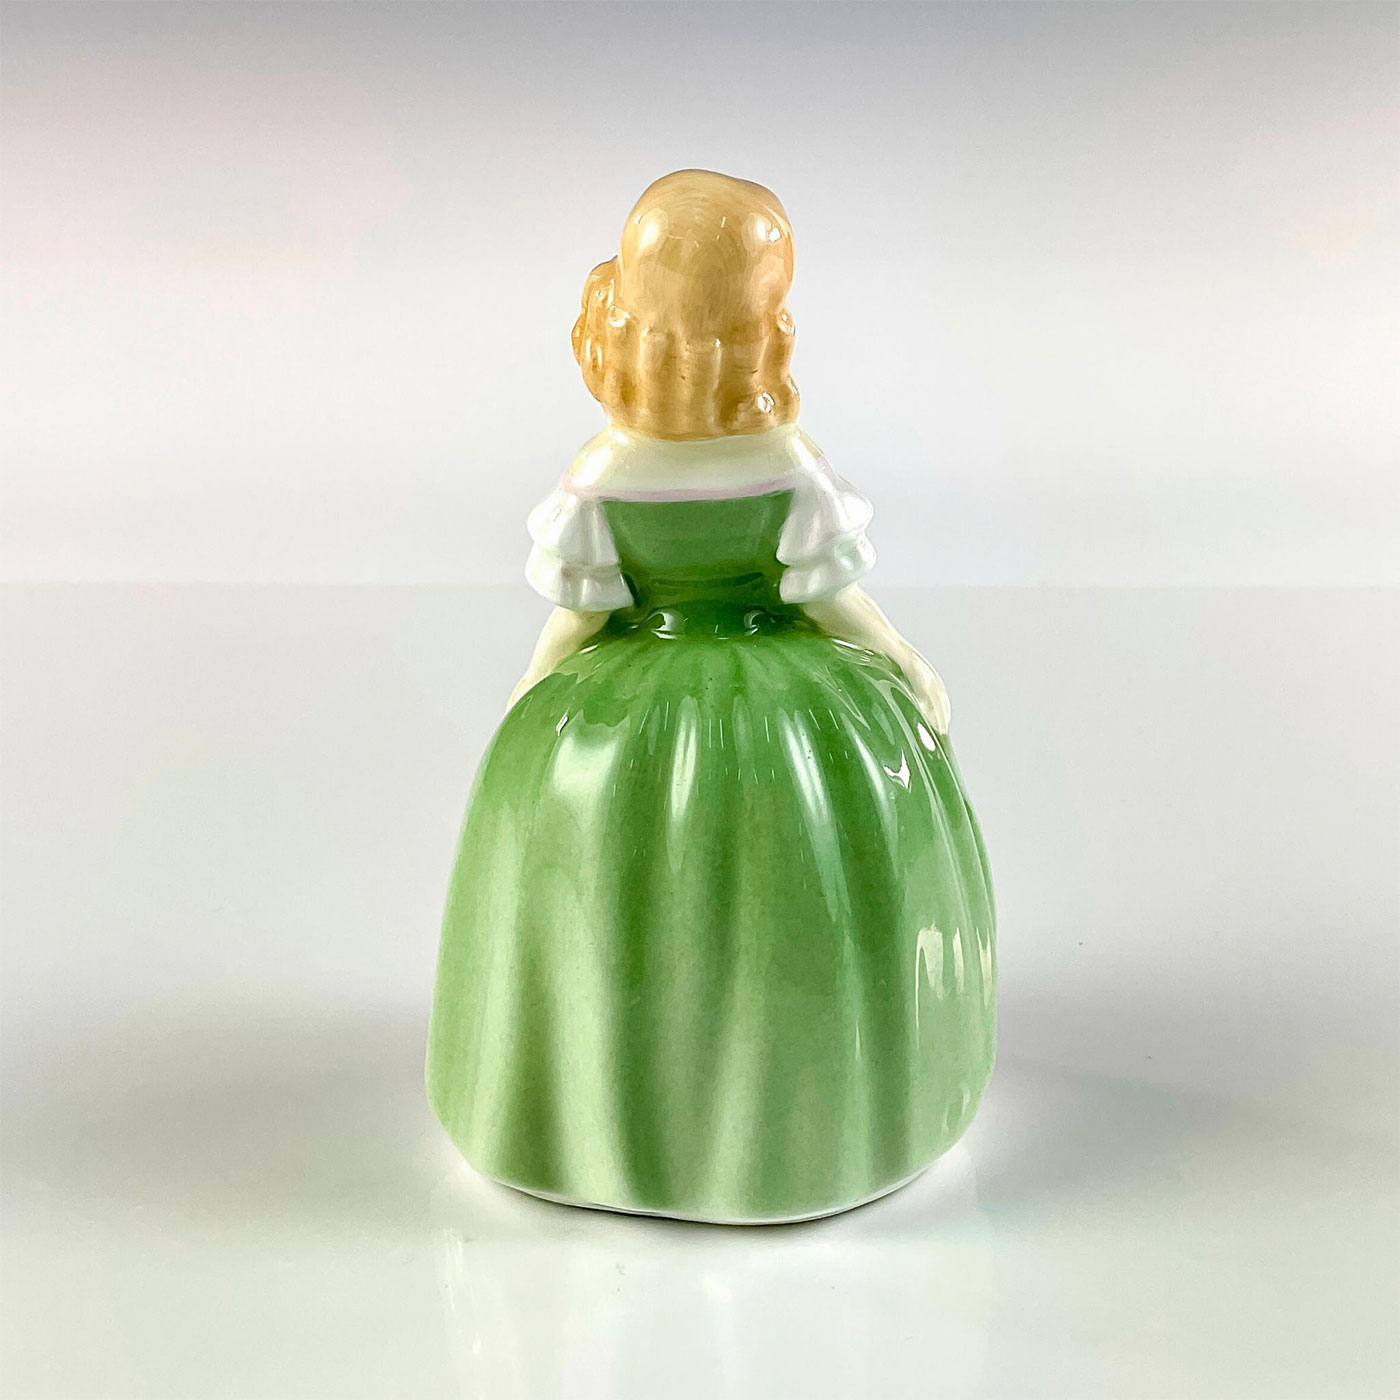 Penny HN2338 - Royal Doulton Figurine - Image 2 of 3